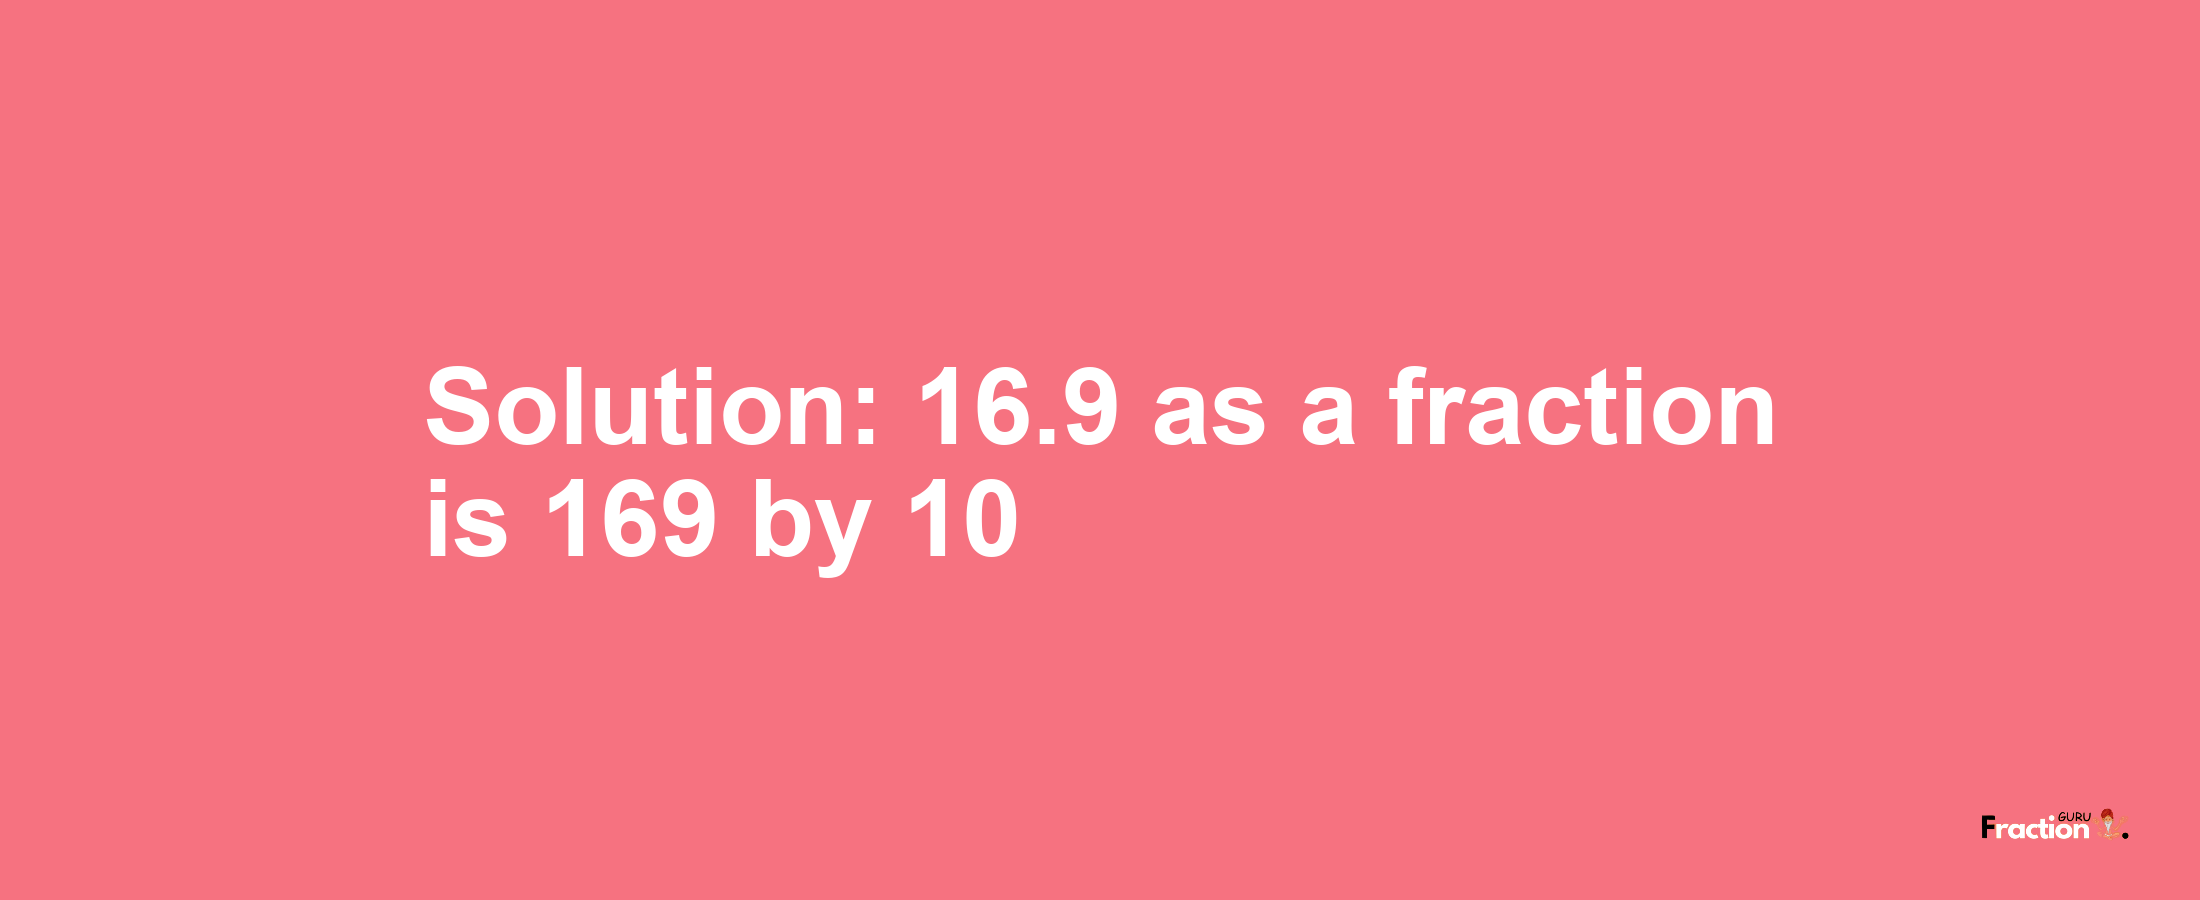 Solution:16.9 as a fraction is 169/10